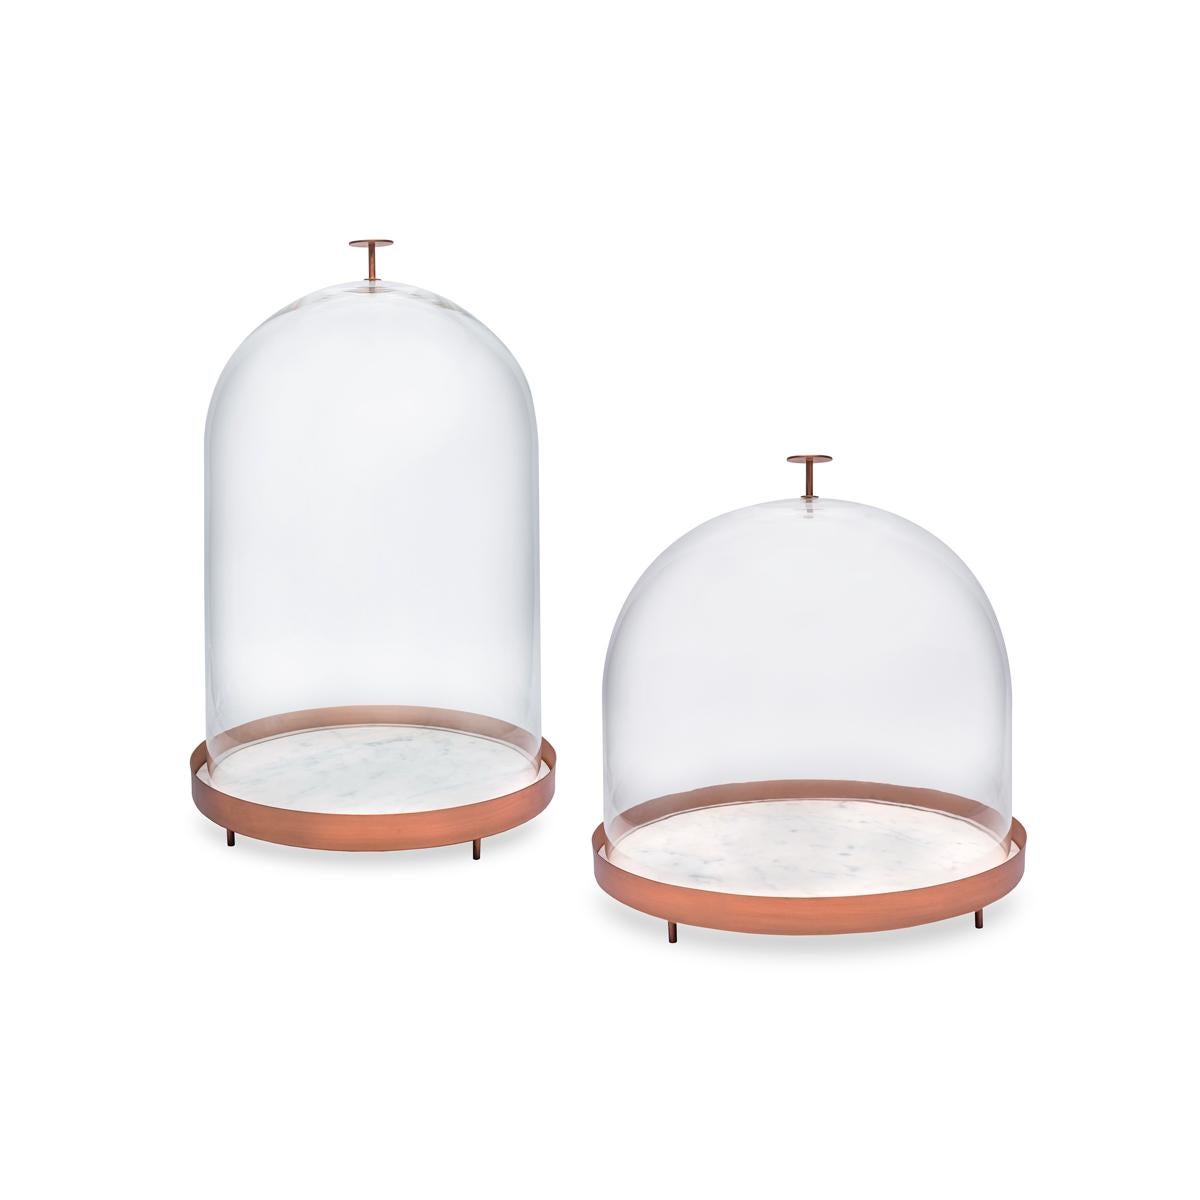 New Moon Small Glass Bell with Copper and Carrara Marble Tray by Elisa Ossino In New Condition For Sale In Milan, IT